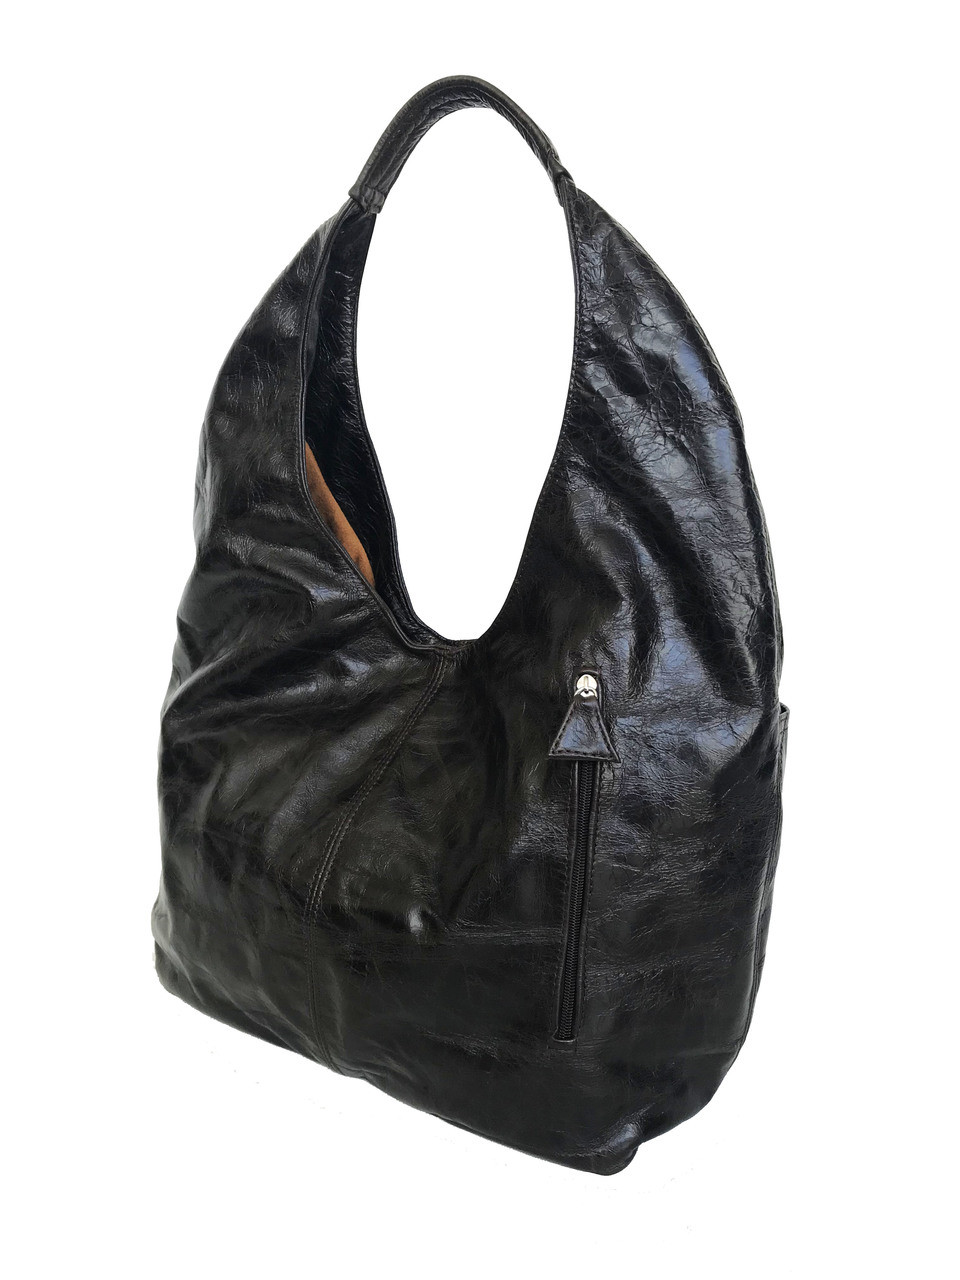 Distressed Brown Leather Hobo Bag, Large Everyday Purse, Alexis ...